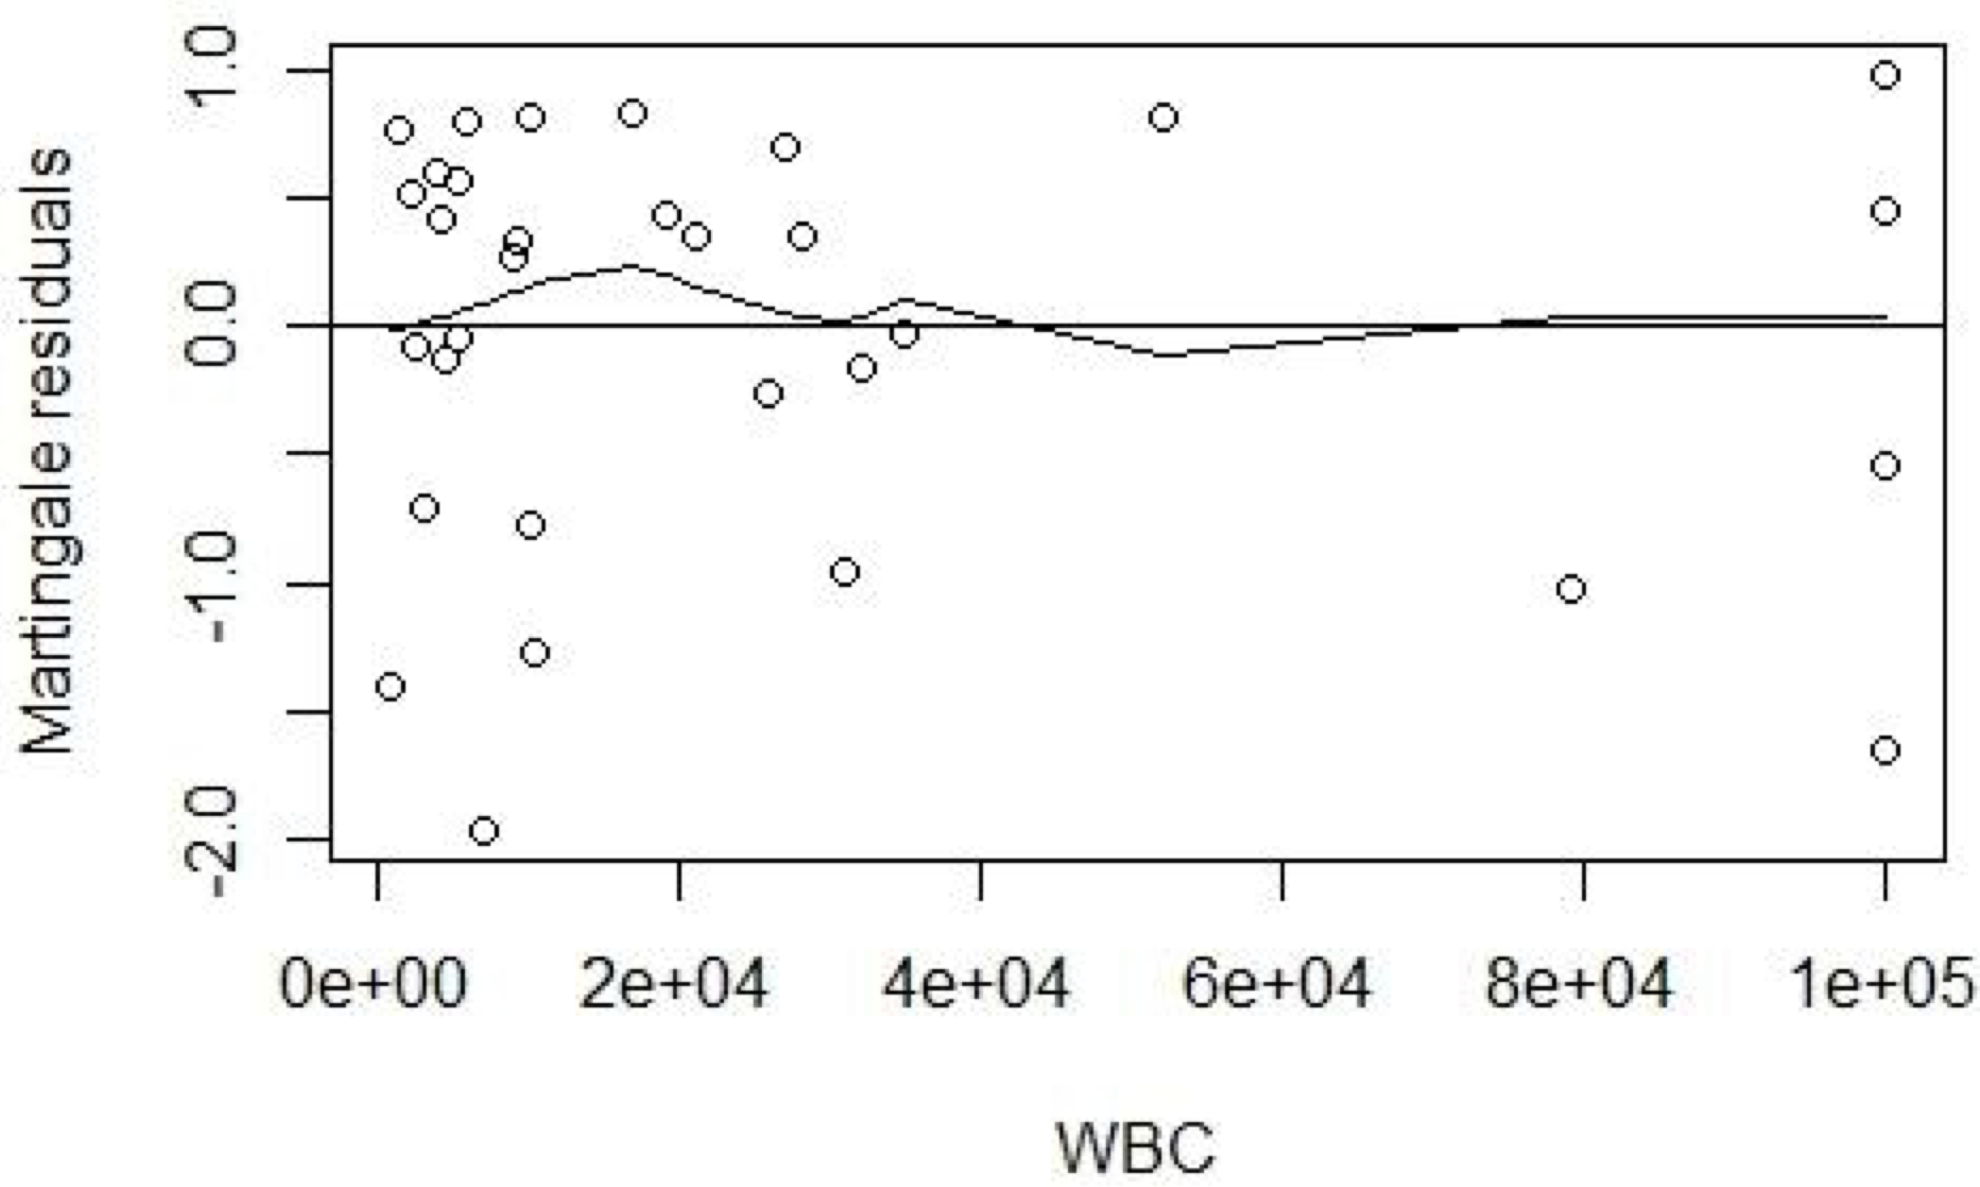 Plot of Martingale residuals (from a model with AG and categorized WBC) against WBC.